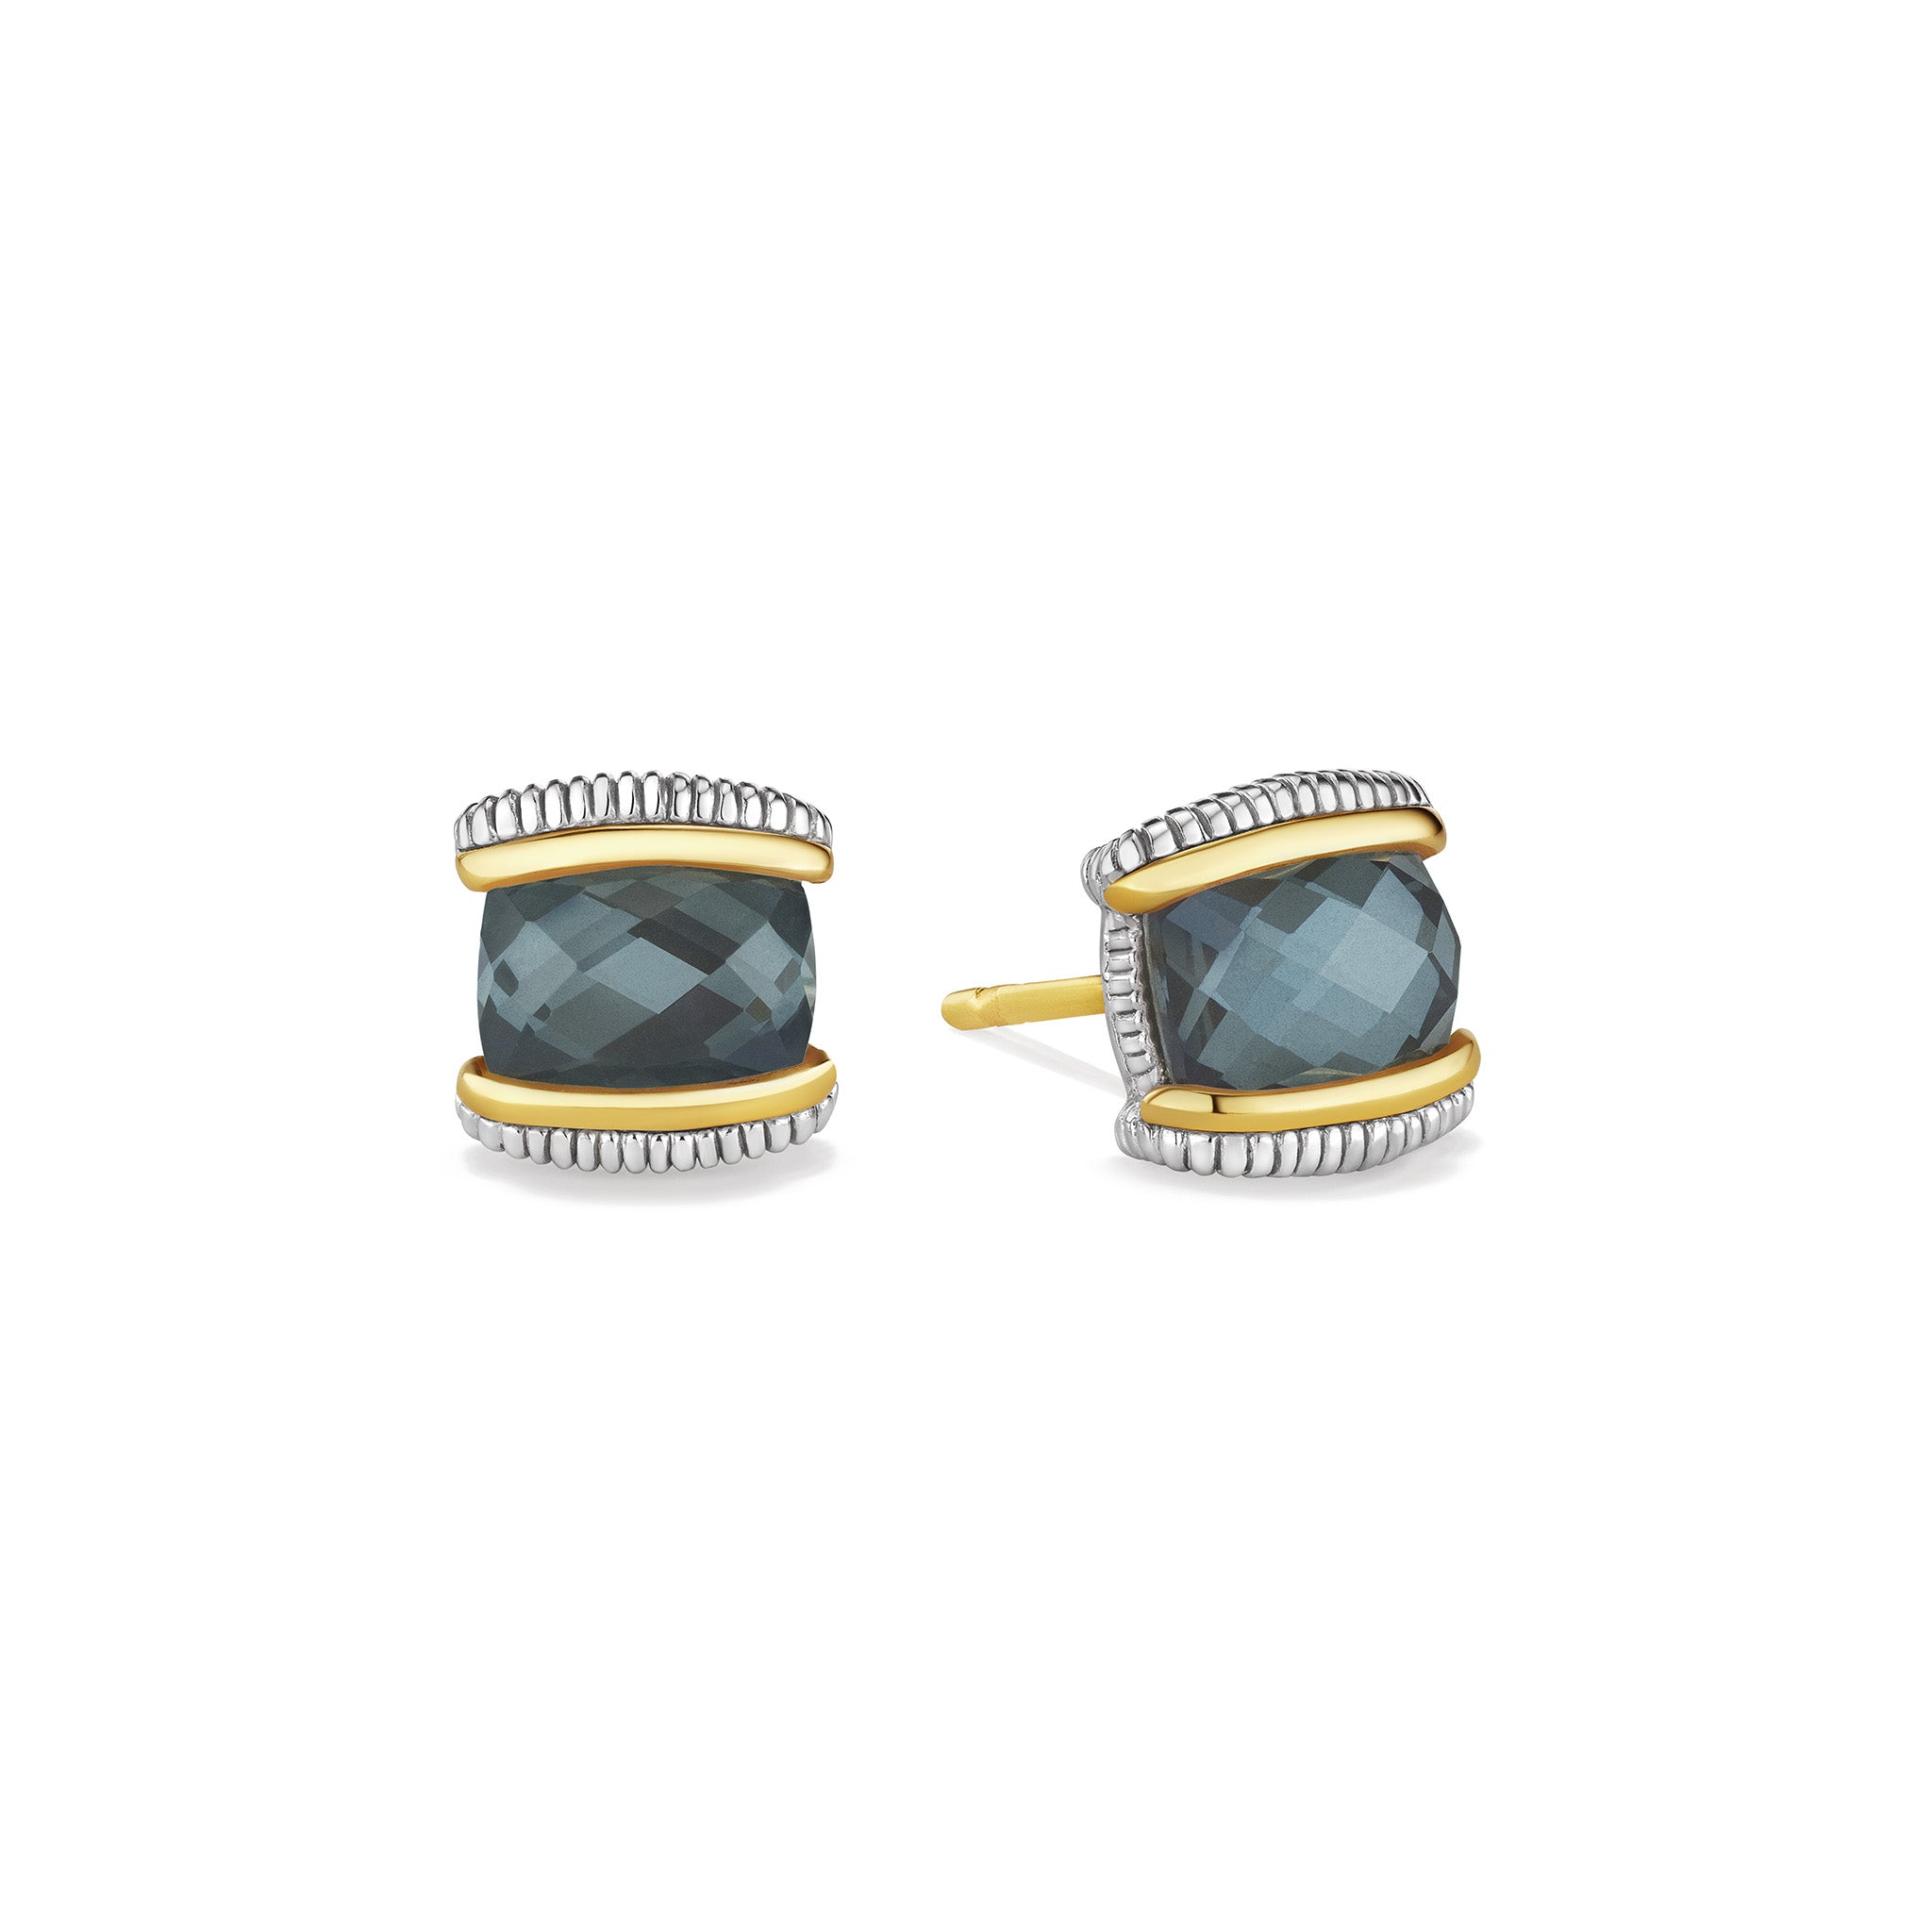 Eternity Stud Earrings With Blue Quartz Over Hematite Doublet And 18K Gold